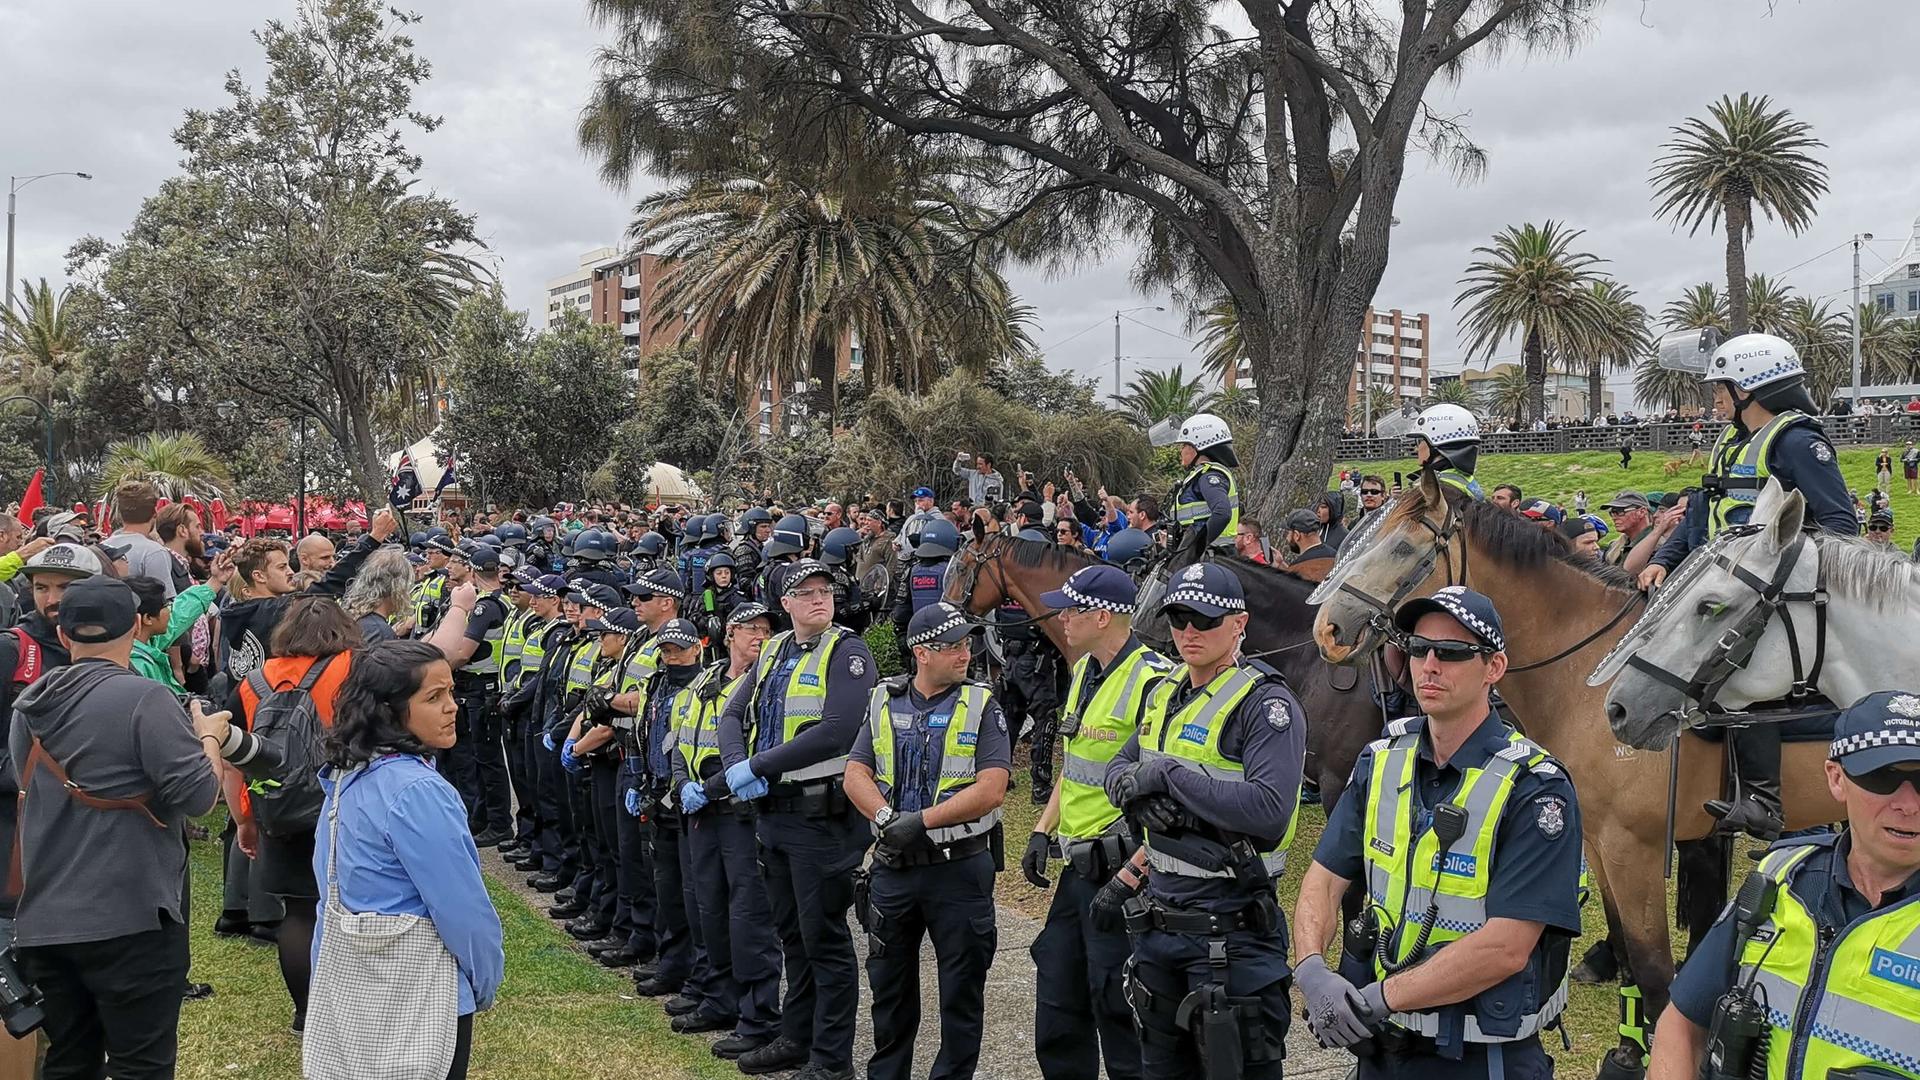 A line of protesters encounter a line of police.